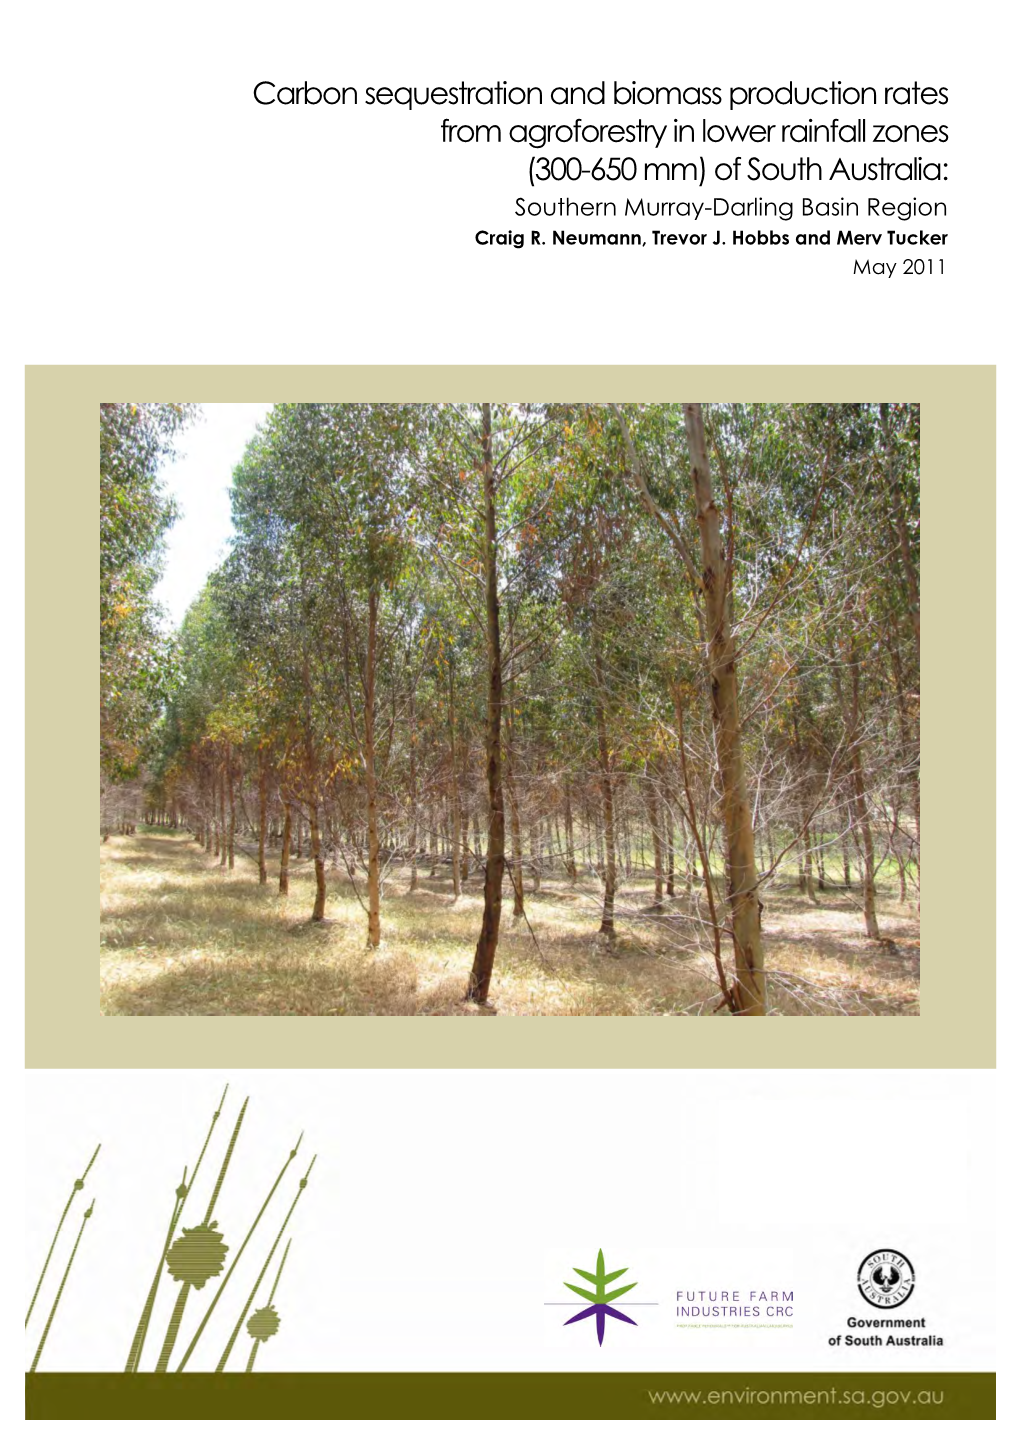 Carbon Sequestration and Biomass Production Rates from Agroforestry